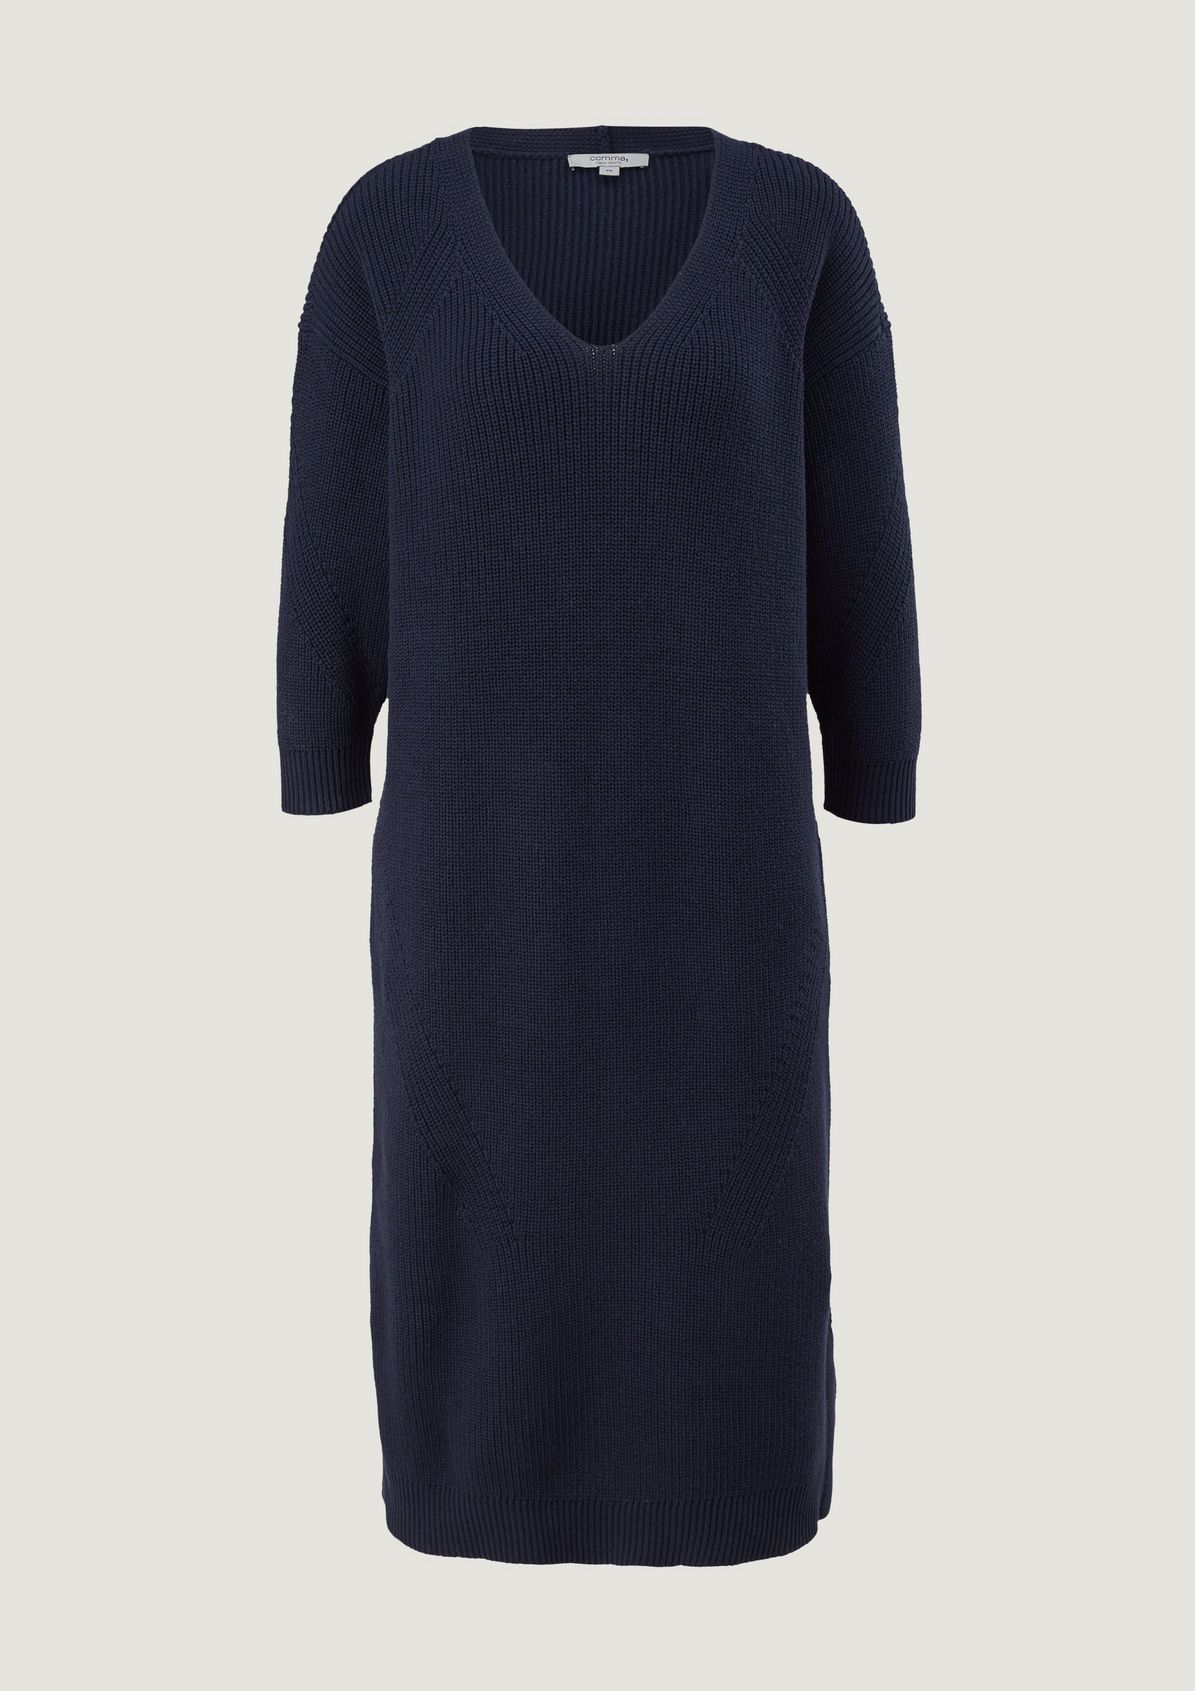 Knit dress with 3/4-length sleeves from comma